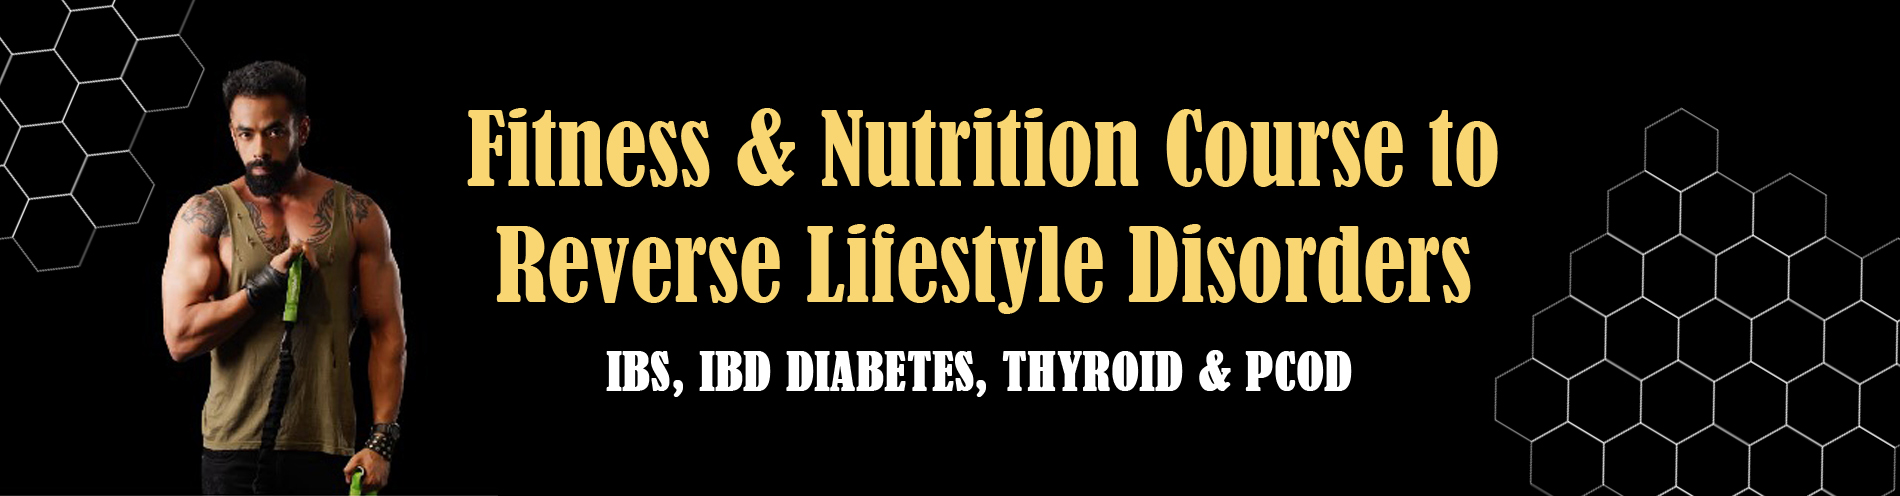 Fitness & Nutrition Course to Reverse Lifestyle Disorders